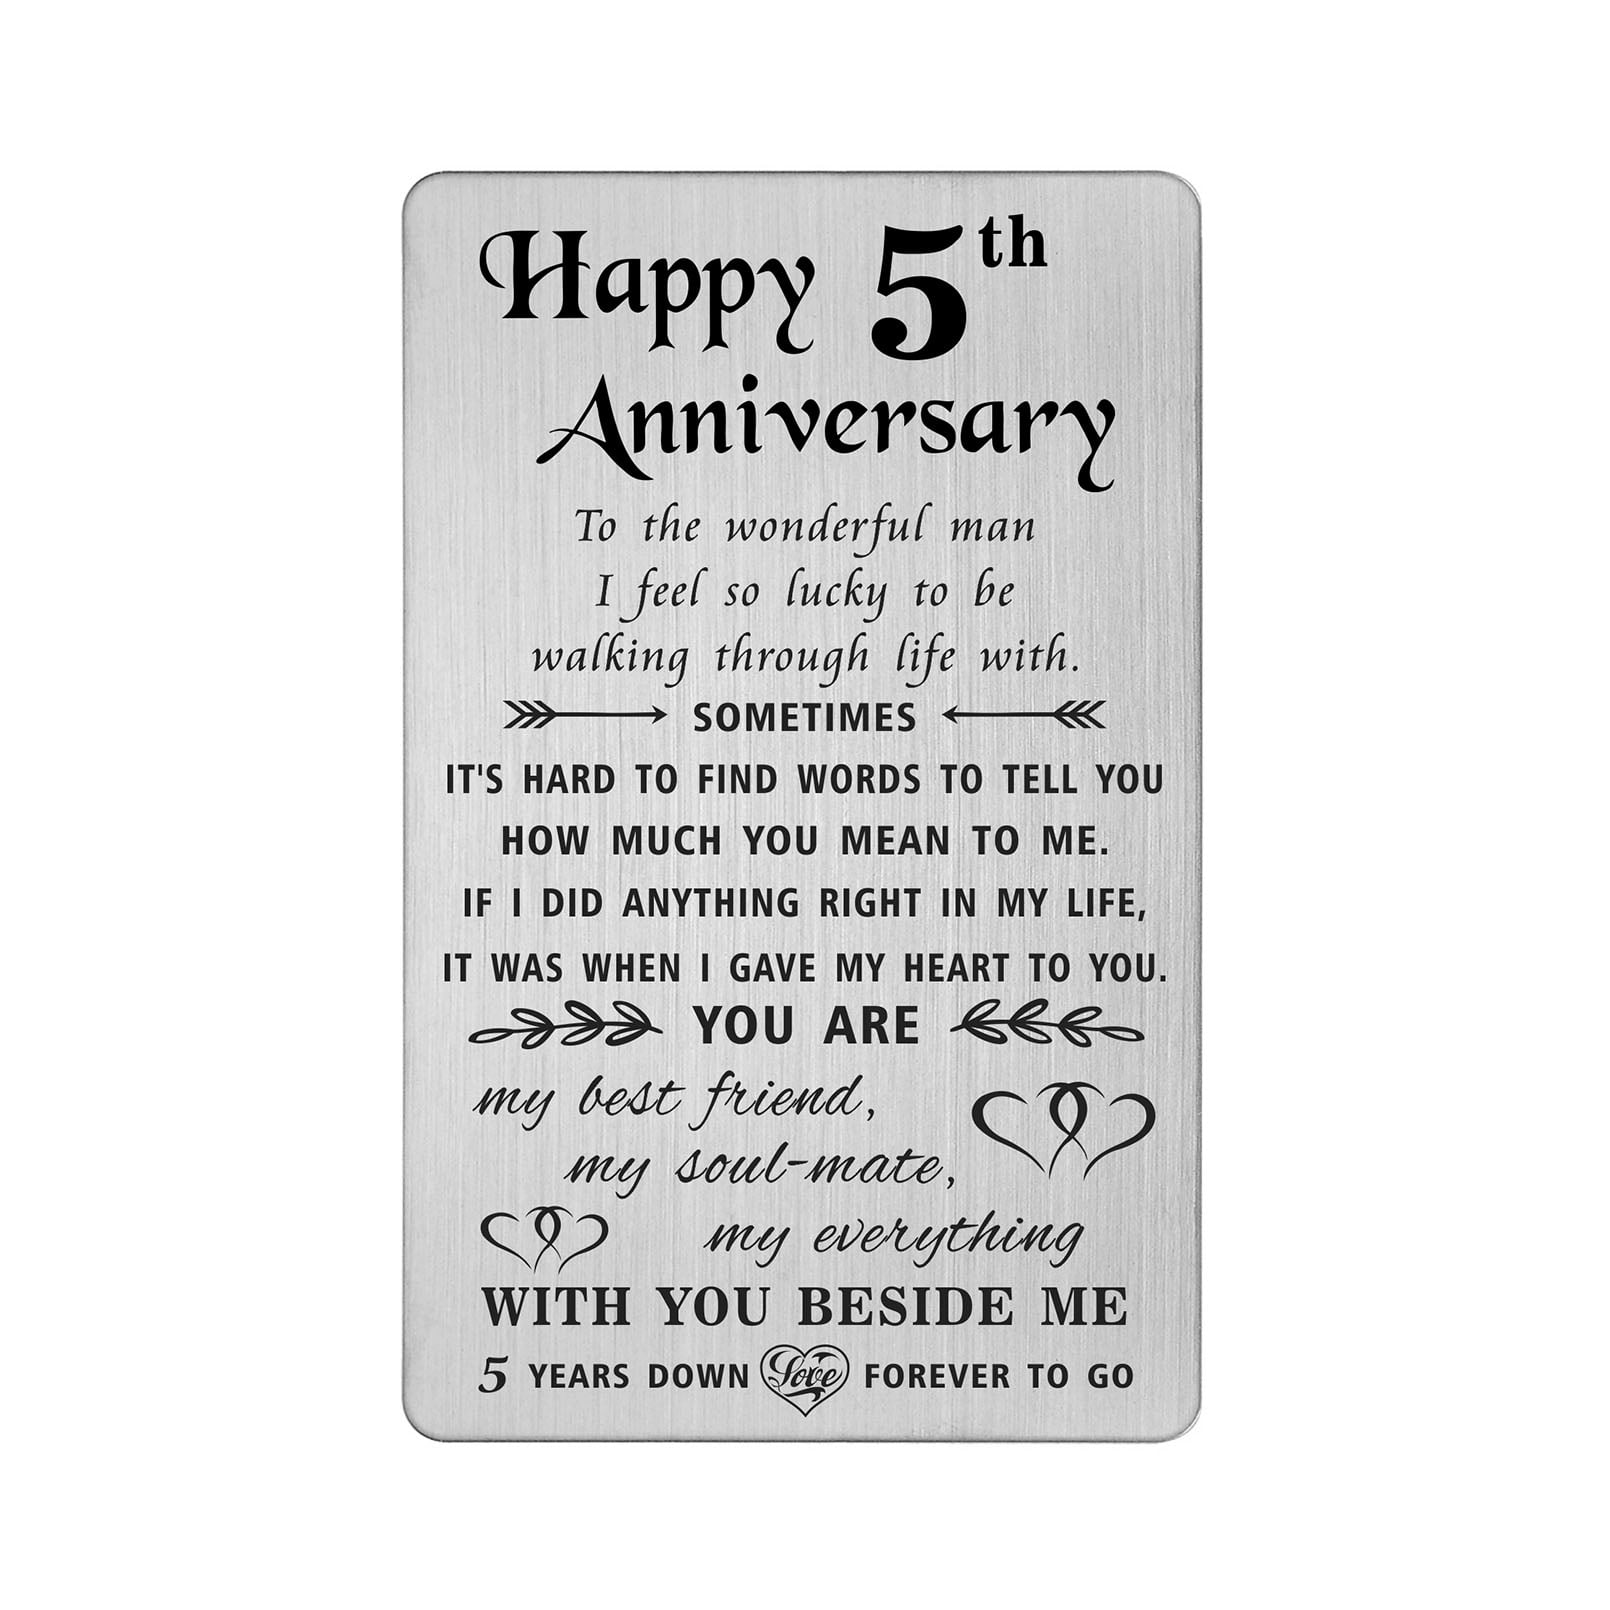 5 Year Anniversary Card Gifts For Him Husband, Happy 5Th Fifth Wedding  Anniversary Cards Gift For Men, Engraved Metal Wallet Insert, Unique Five  Year